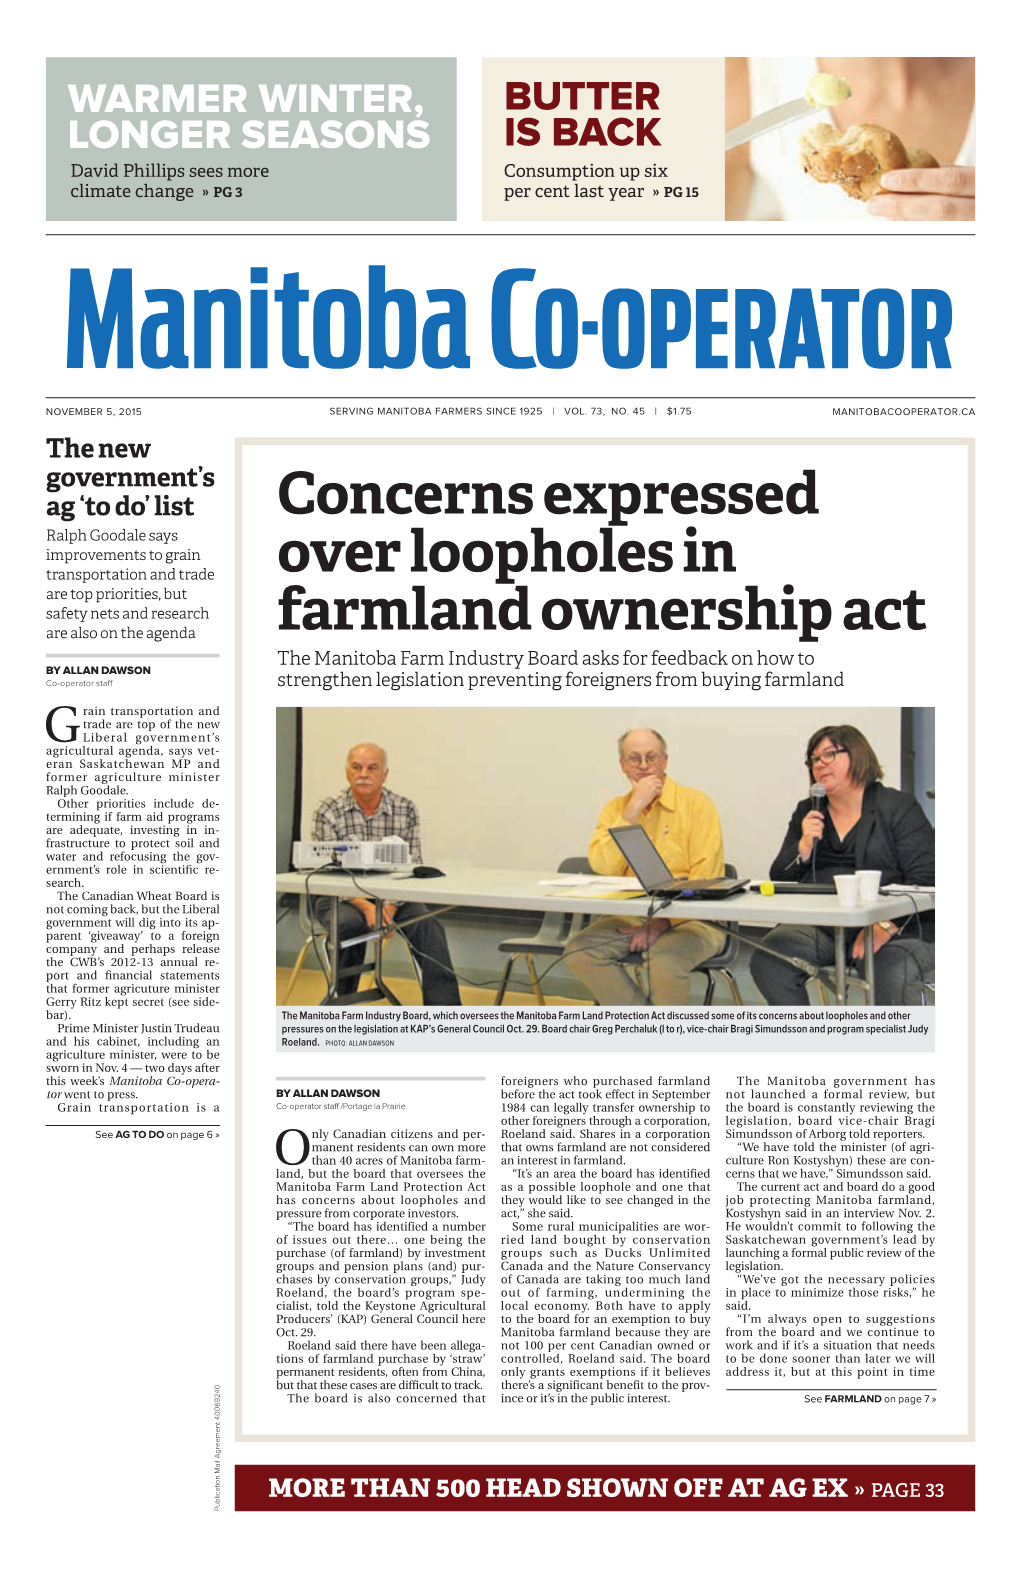 Concerns Expressed Over Loopholes in Farmland Ownership